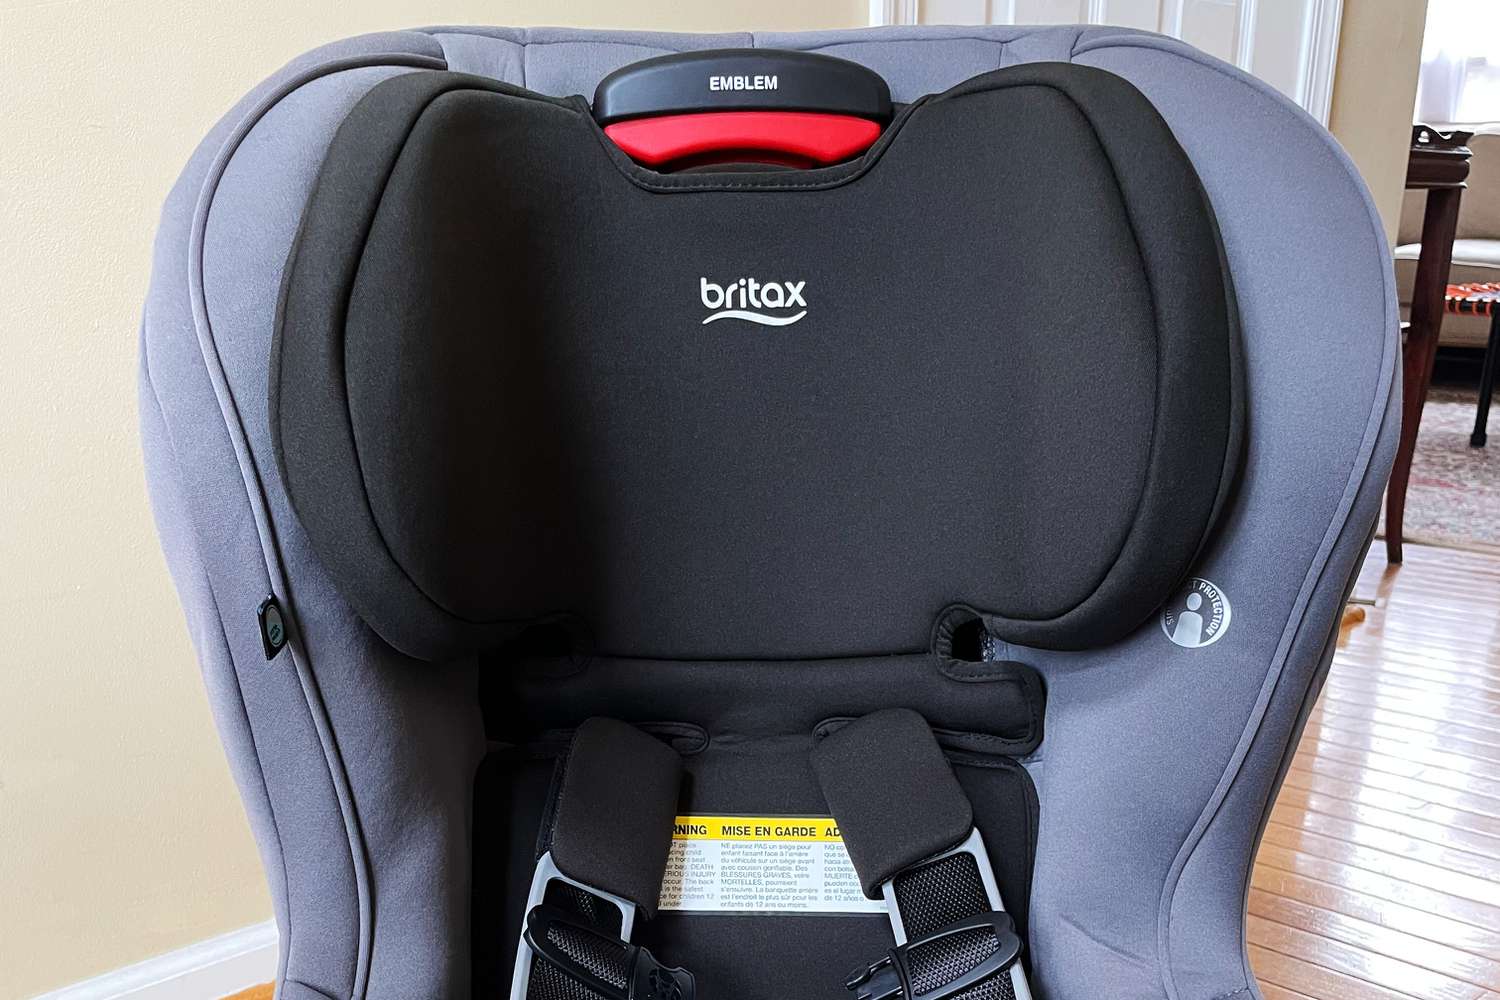 The Britax Emblem 3-Stage Convertible Car Seat out of the box